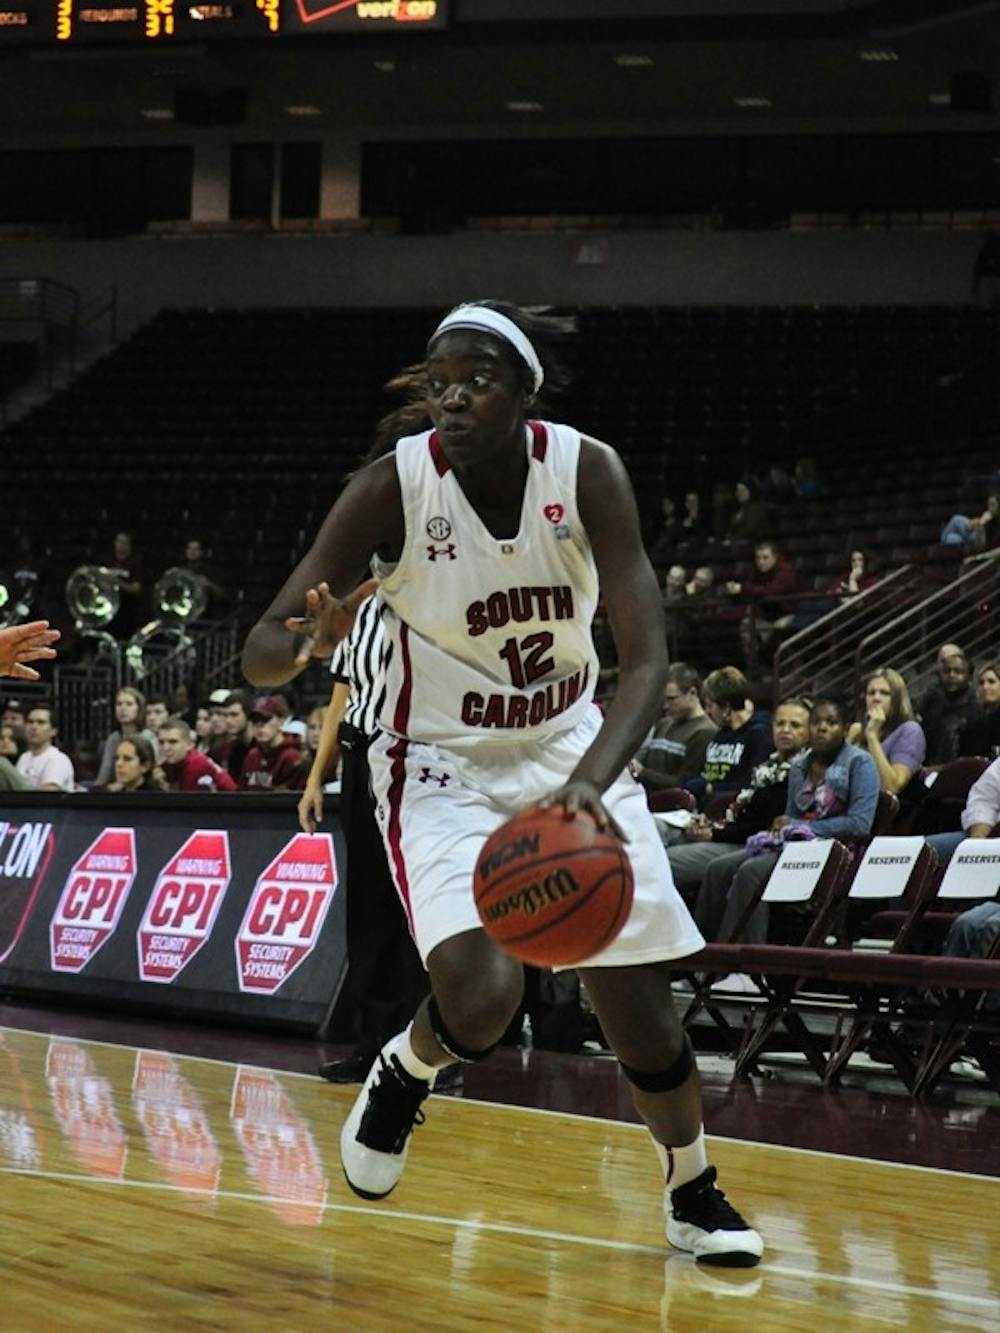 Junior transfer Wilka Montout received additional playing time due to an injury to sophomore center Elem Ibiam.